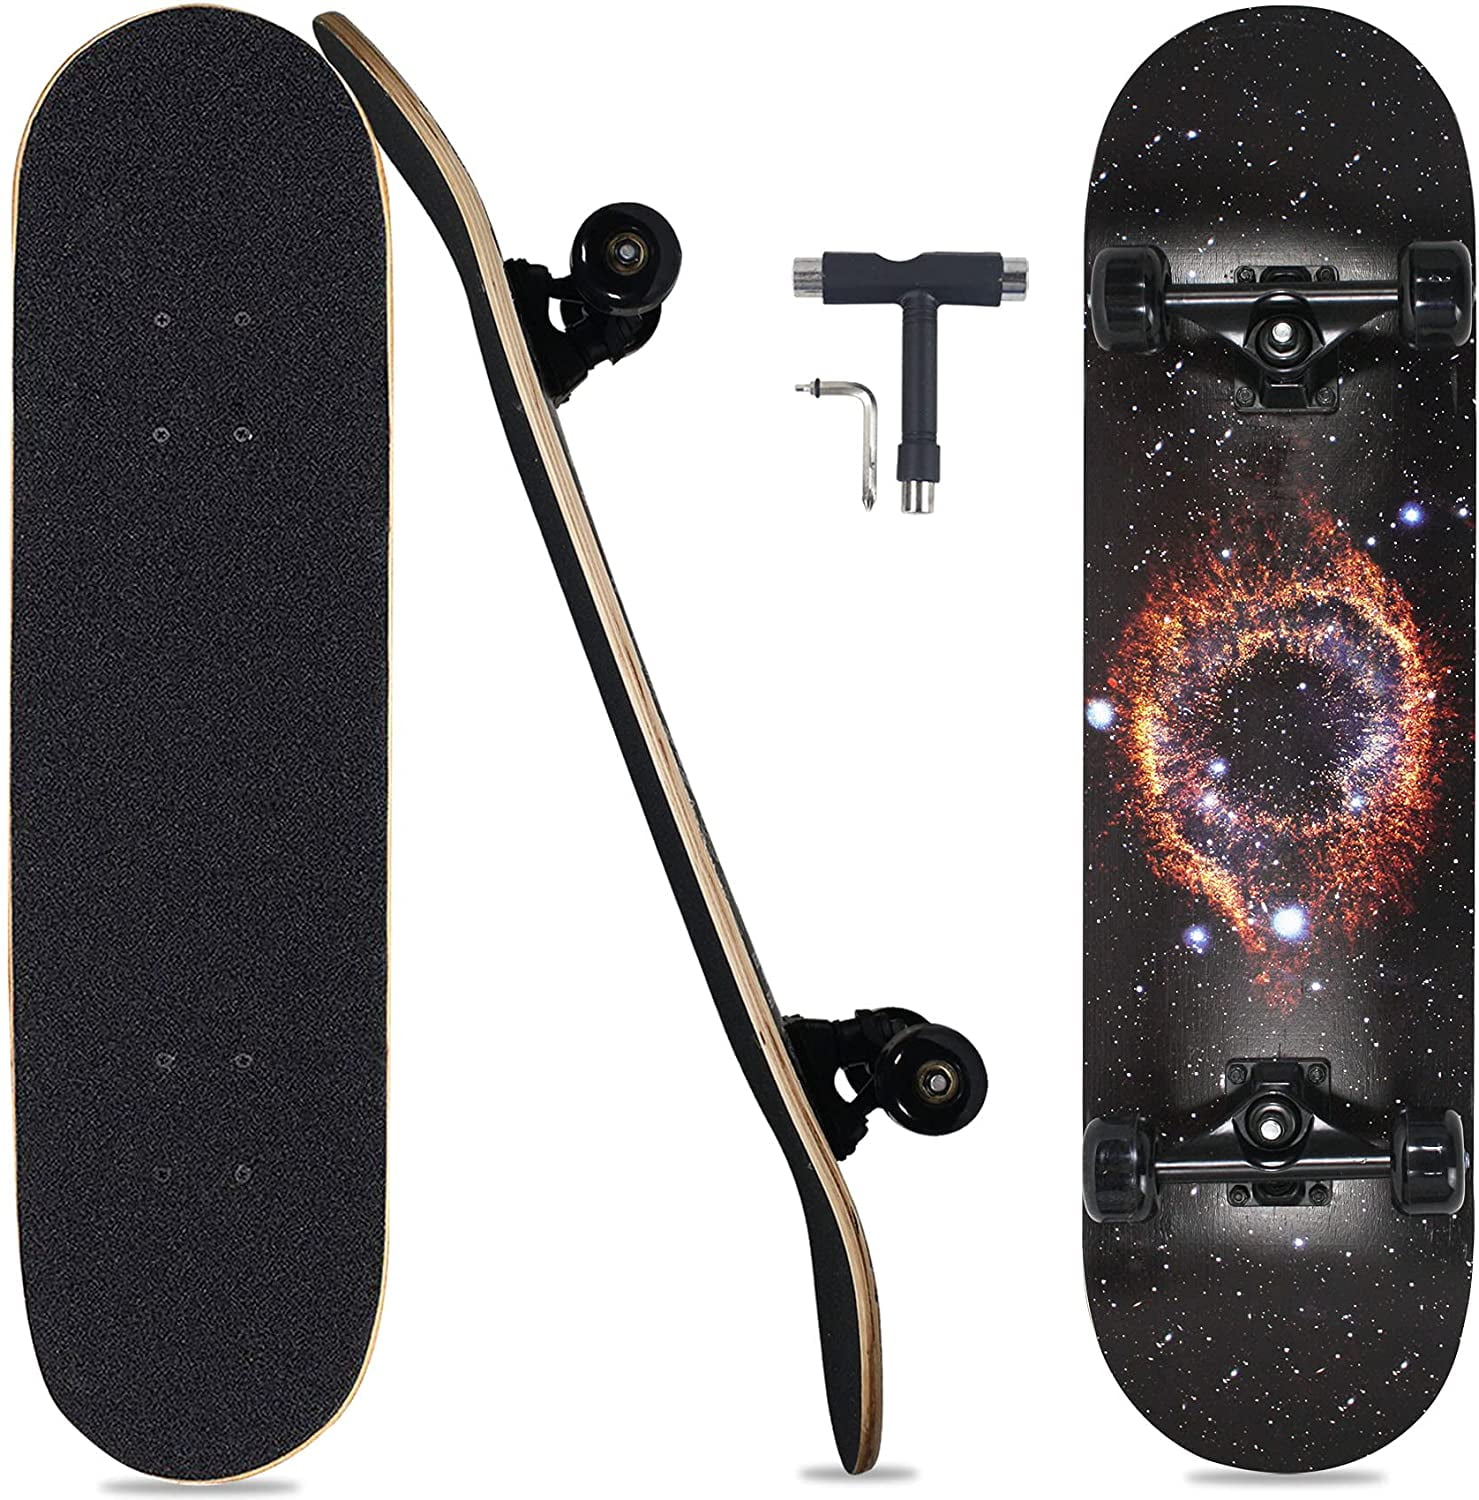 Pwigs Pro Complete Skateboards for Beginners Adults Youths Teens Girls Boys 31x8 Skate Boards 7 Layers Deck Maple Wood Longboards